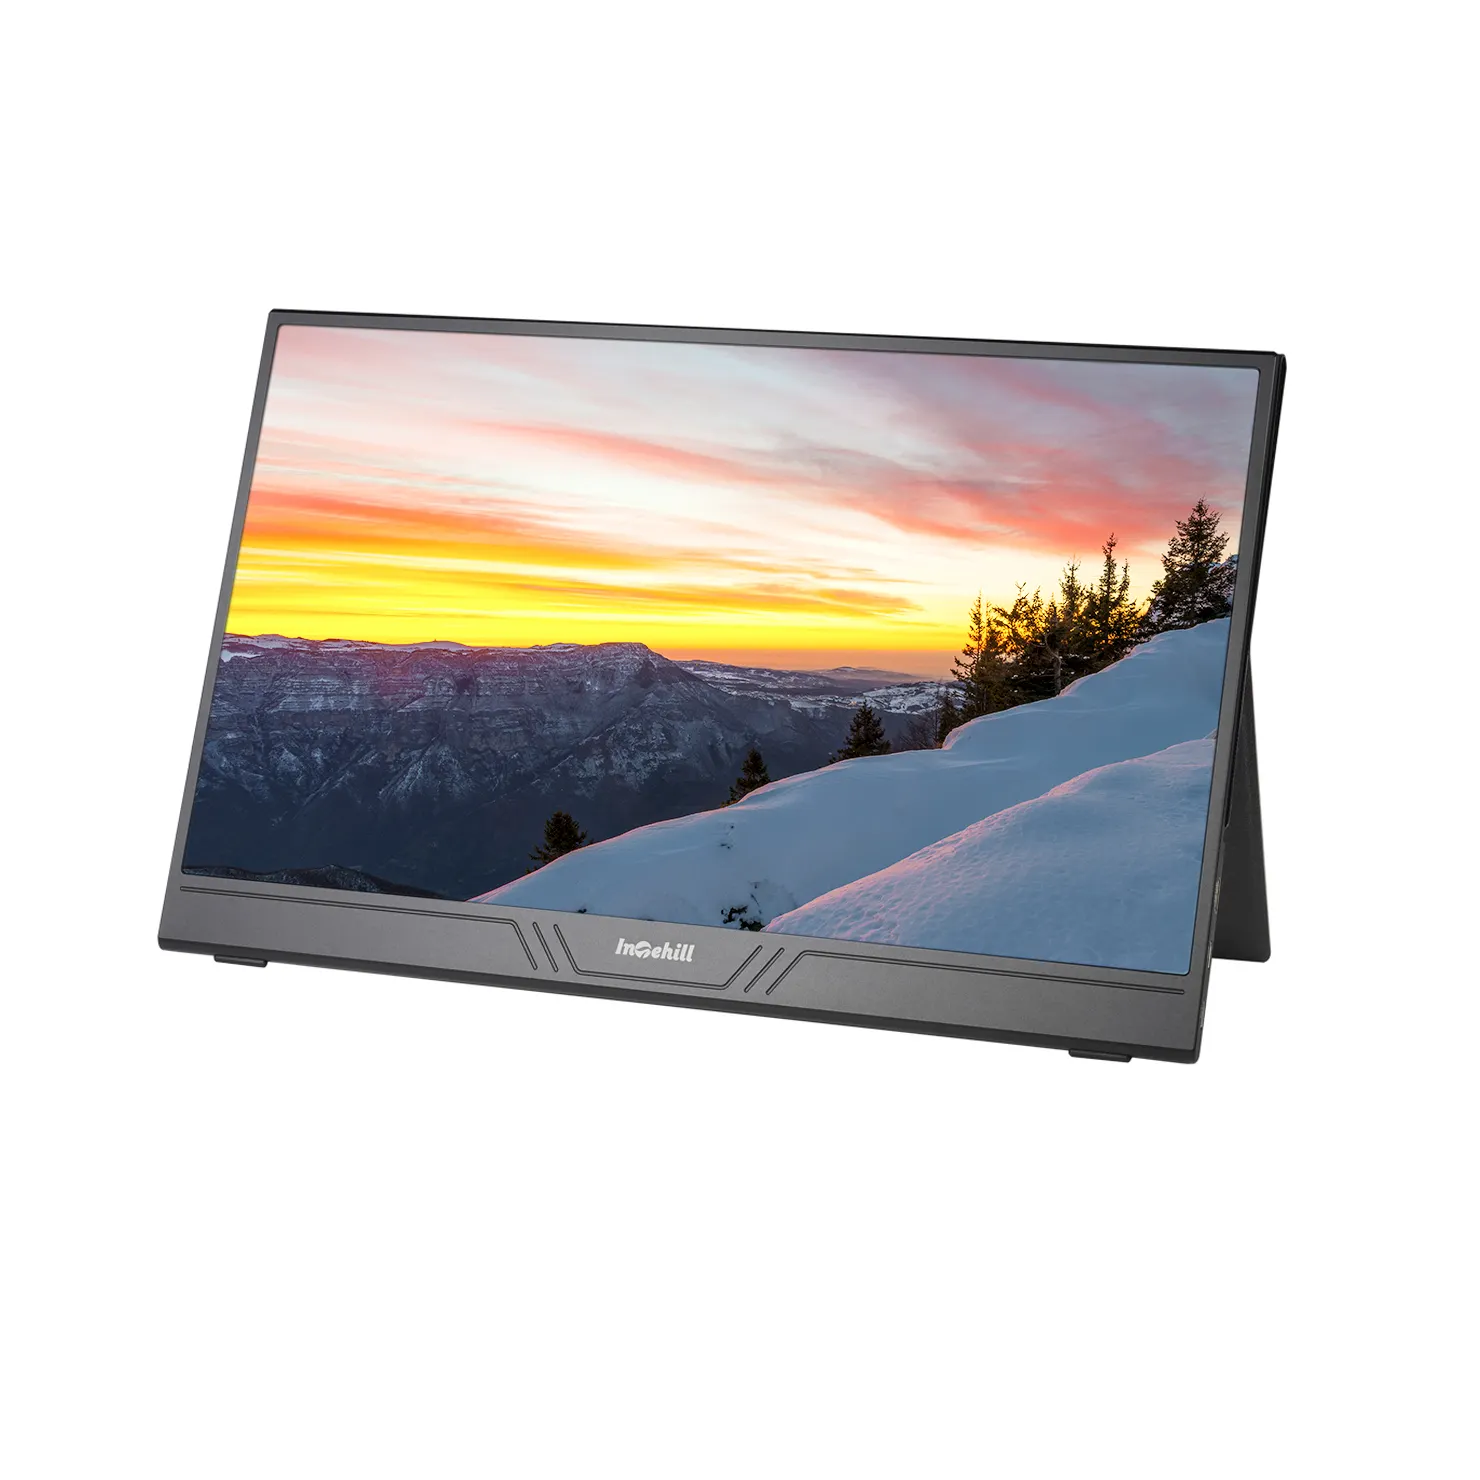 Portable Monitor 15.6 inch 1080P with mini HD and USB Type-C Port